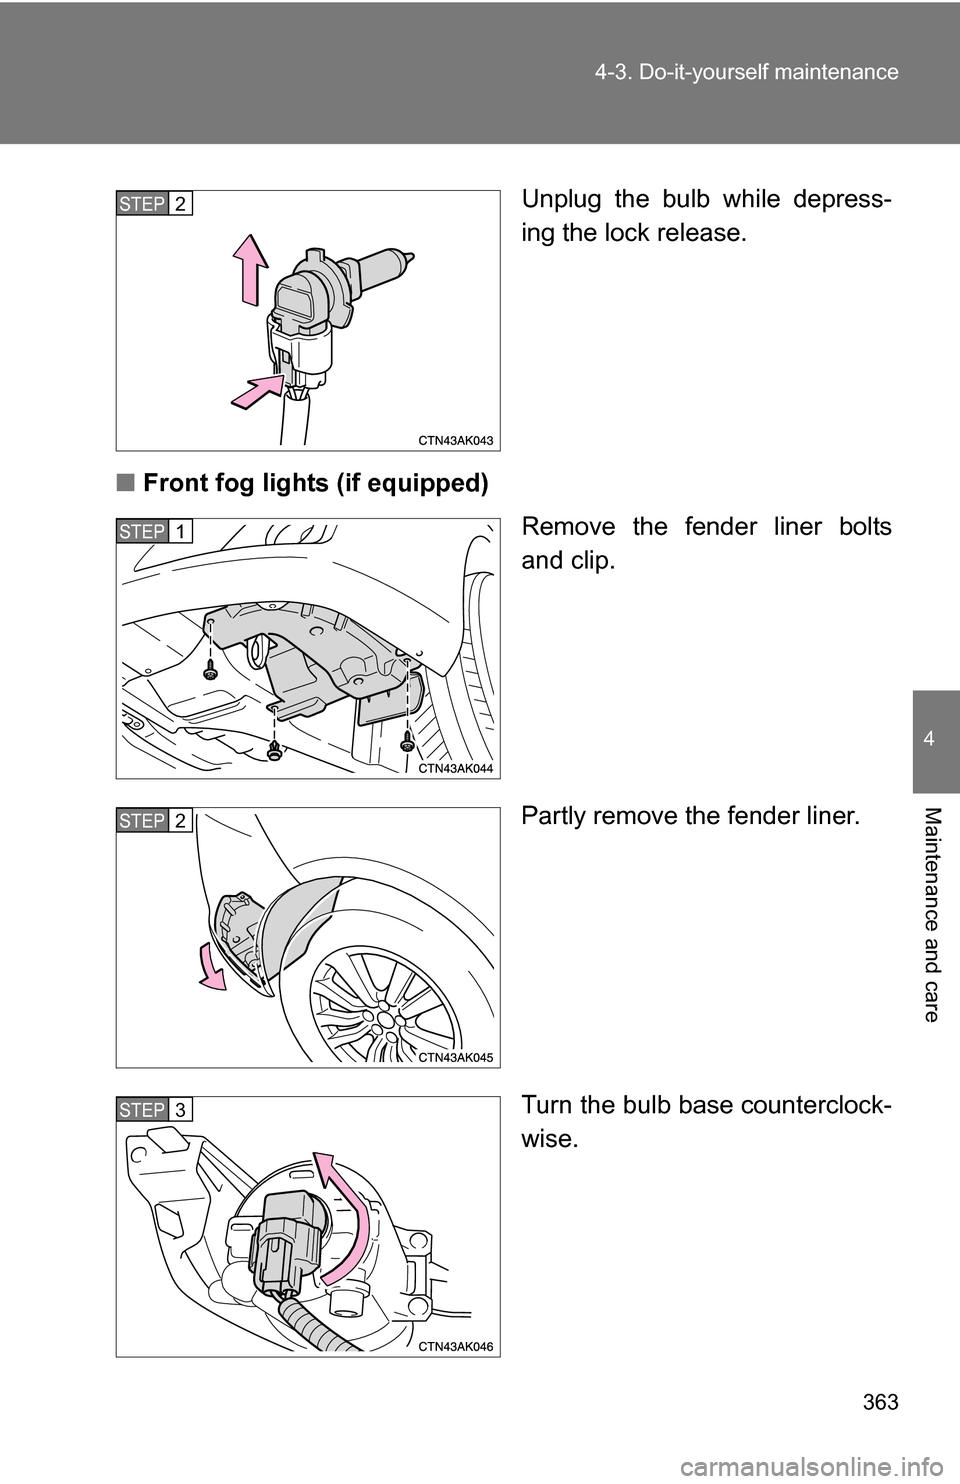 TOYOTA COROLLA 2010 10.G Owners Manual 363
4-3. Do-it-yourself maintenance
4
Maintenance and care
Unplug the bulb while depress-
ing the lock release.
■ Front fog lights (if equipped)
Remove the fender liner bolts
and clip.
Partly remove